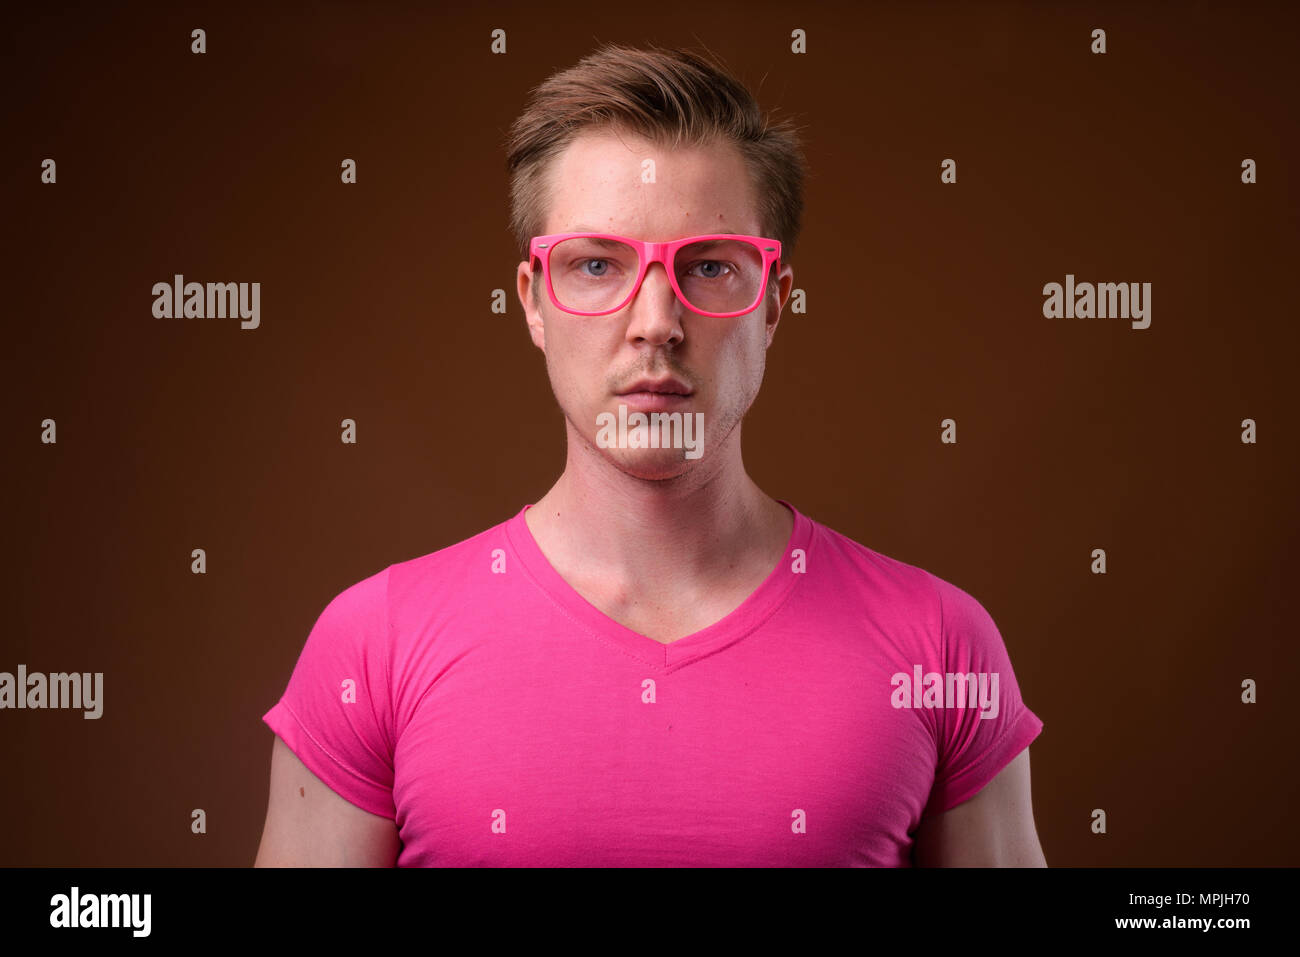 Young handsome man wearing pink shirt and eyeglasses against bro Stock Photo